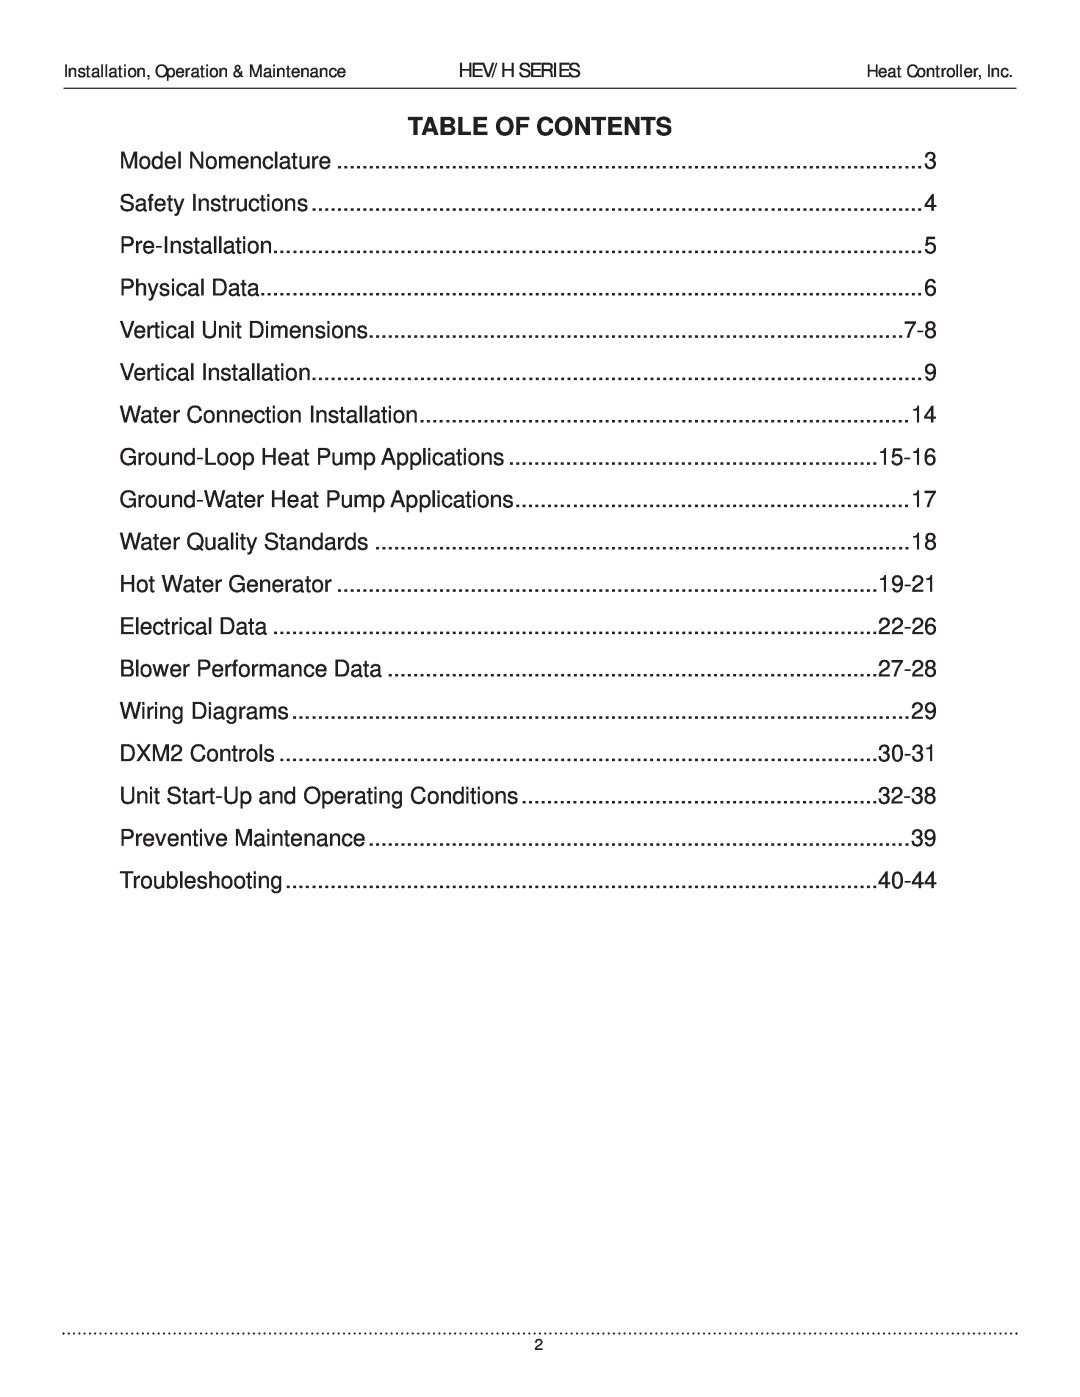 Heat Controller HEV/H Table Of Contents, 15-16, 19-21, 22-26, 27-28, 30-31, Unit Start-Upand Operating Conditions, 32-38 